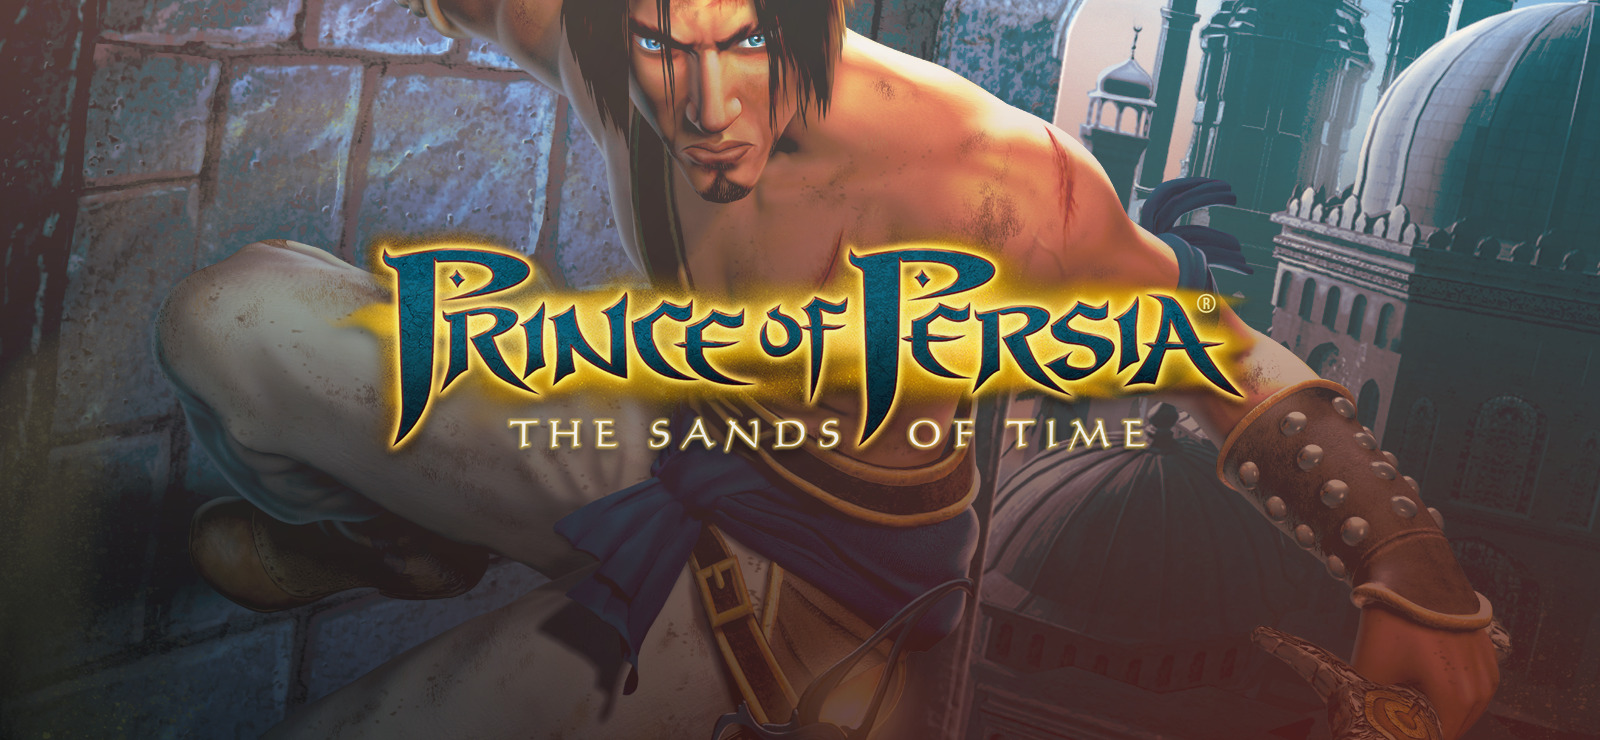 prince of persia watch online free